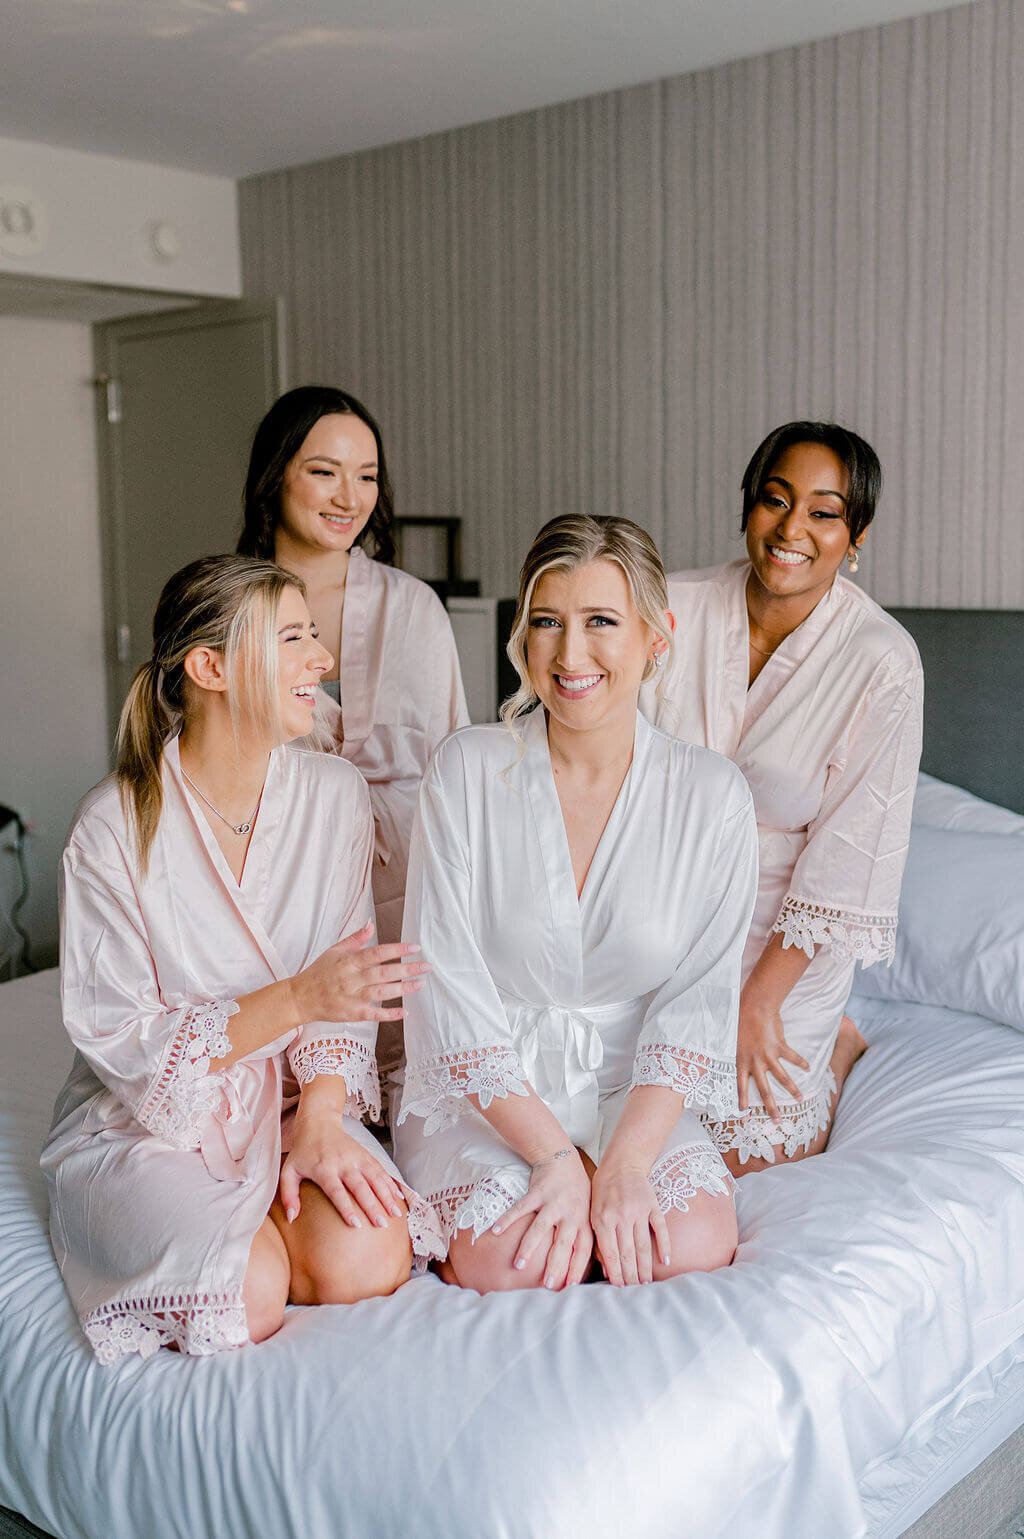 Bridal party in Georgetown hotel in matching robes smiling at one another while sitting on bed.